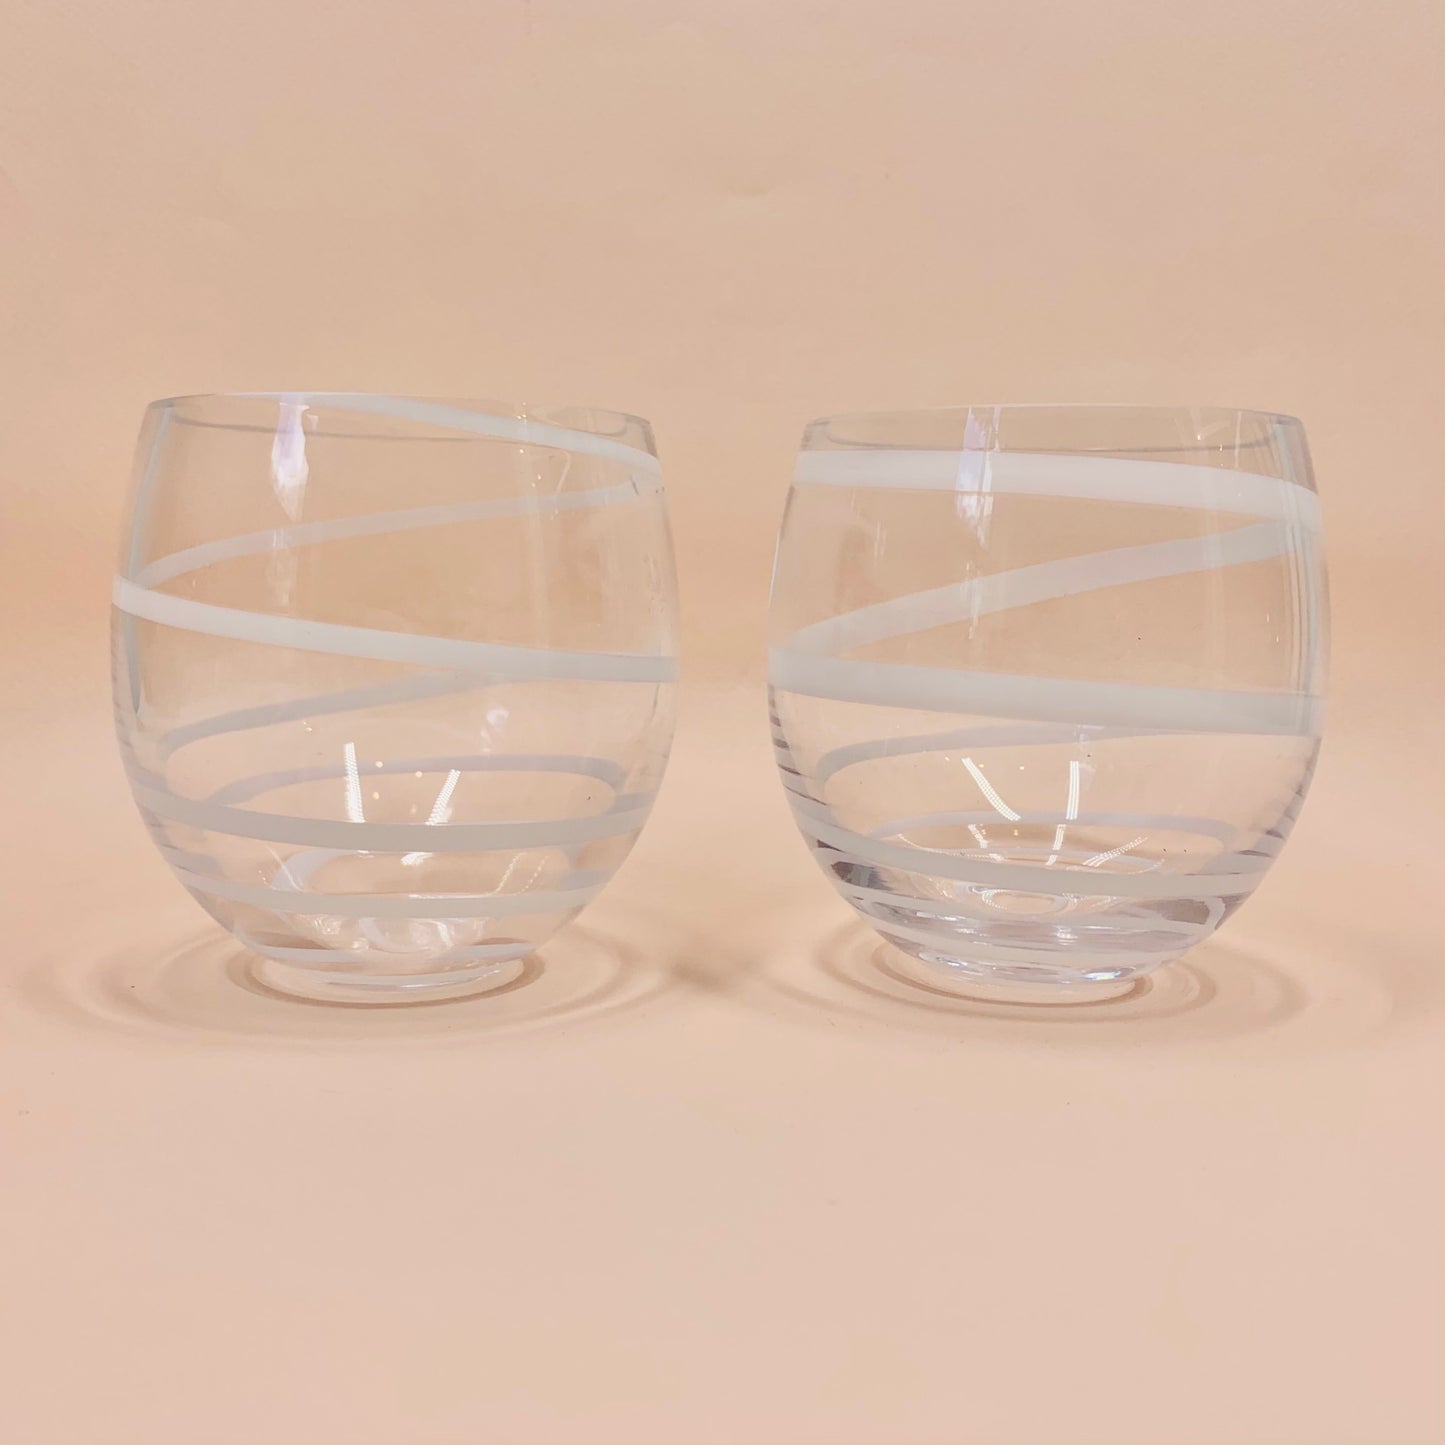 1980s hand made glass with while swirl water/whiskey tumblers